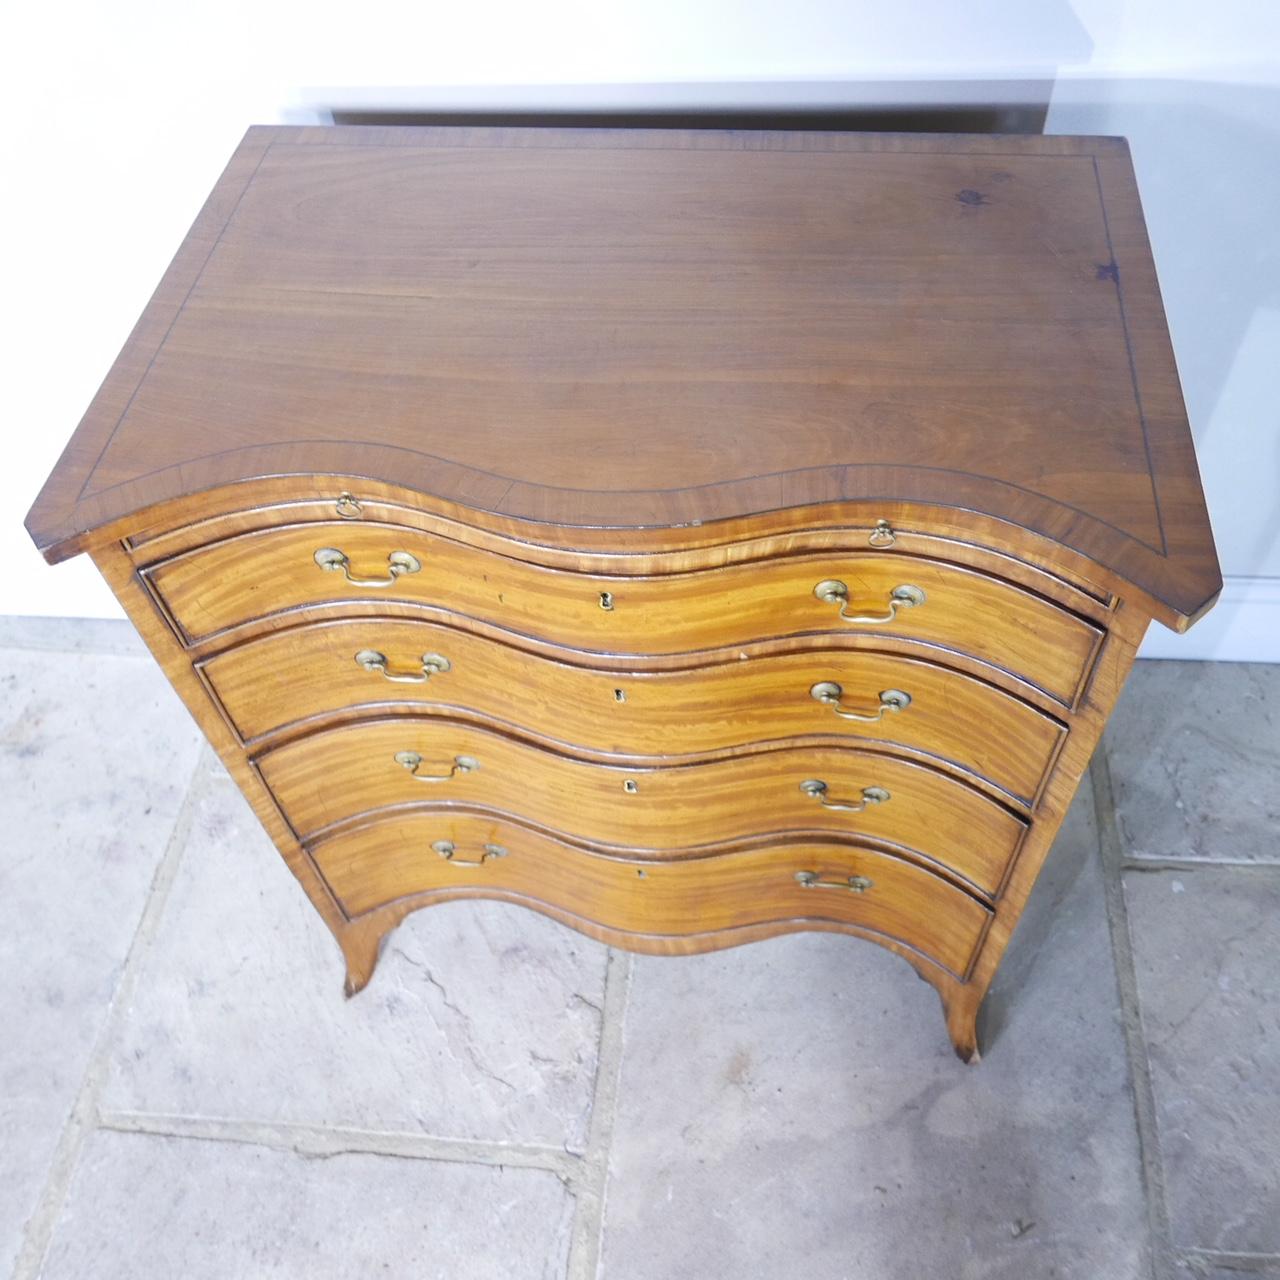 satinwood chest of drawers